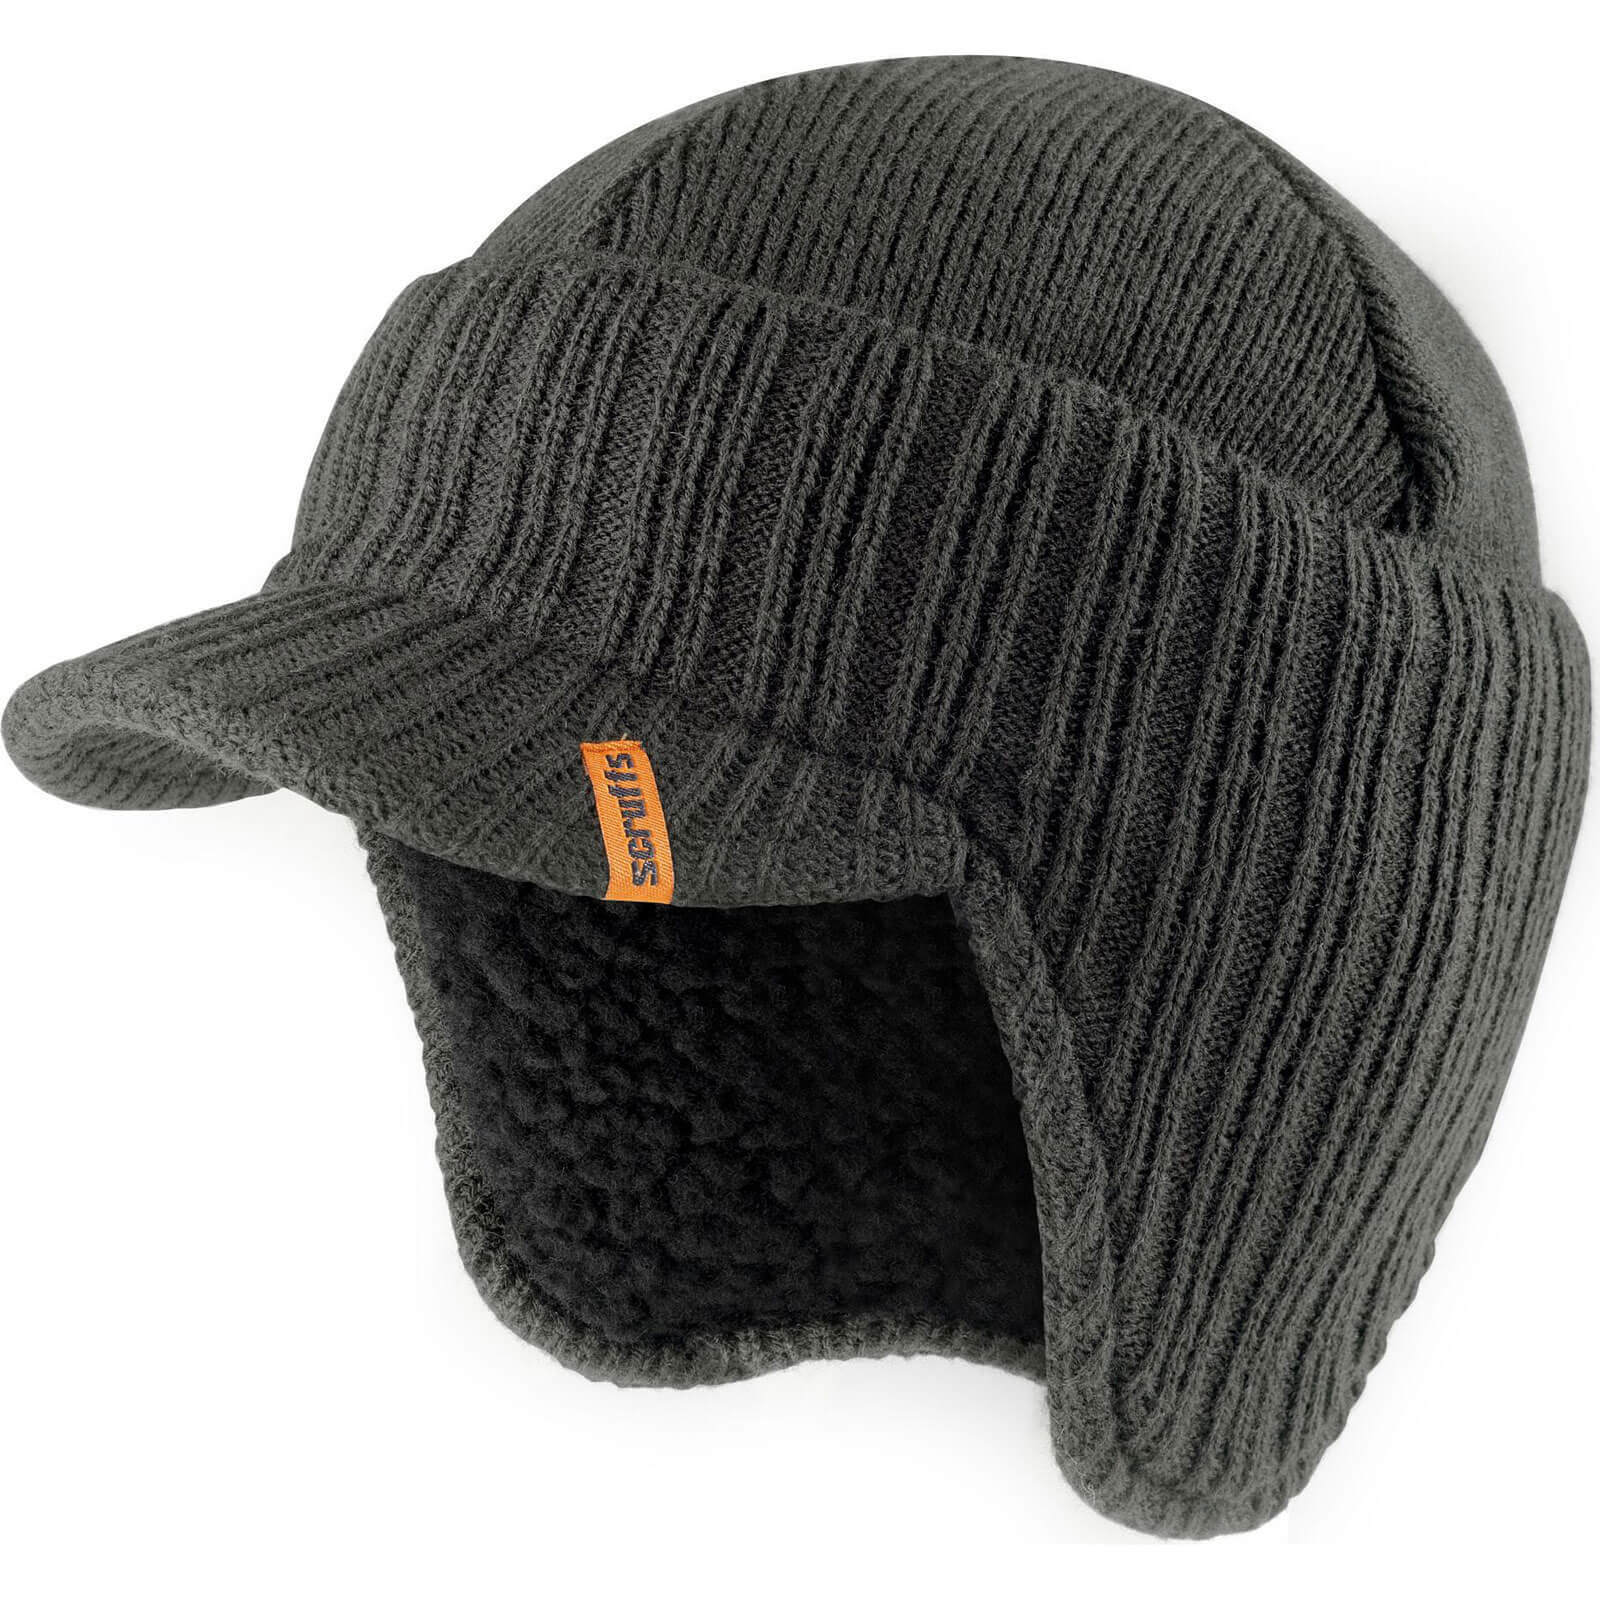 Image of Scruffs Peaked Beanie Hat Graphite One Size